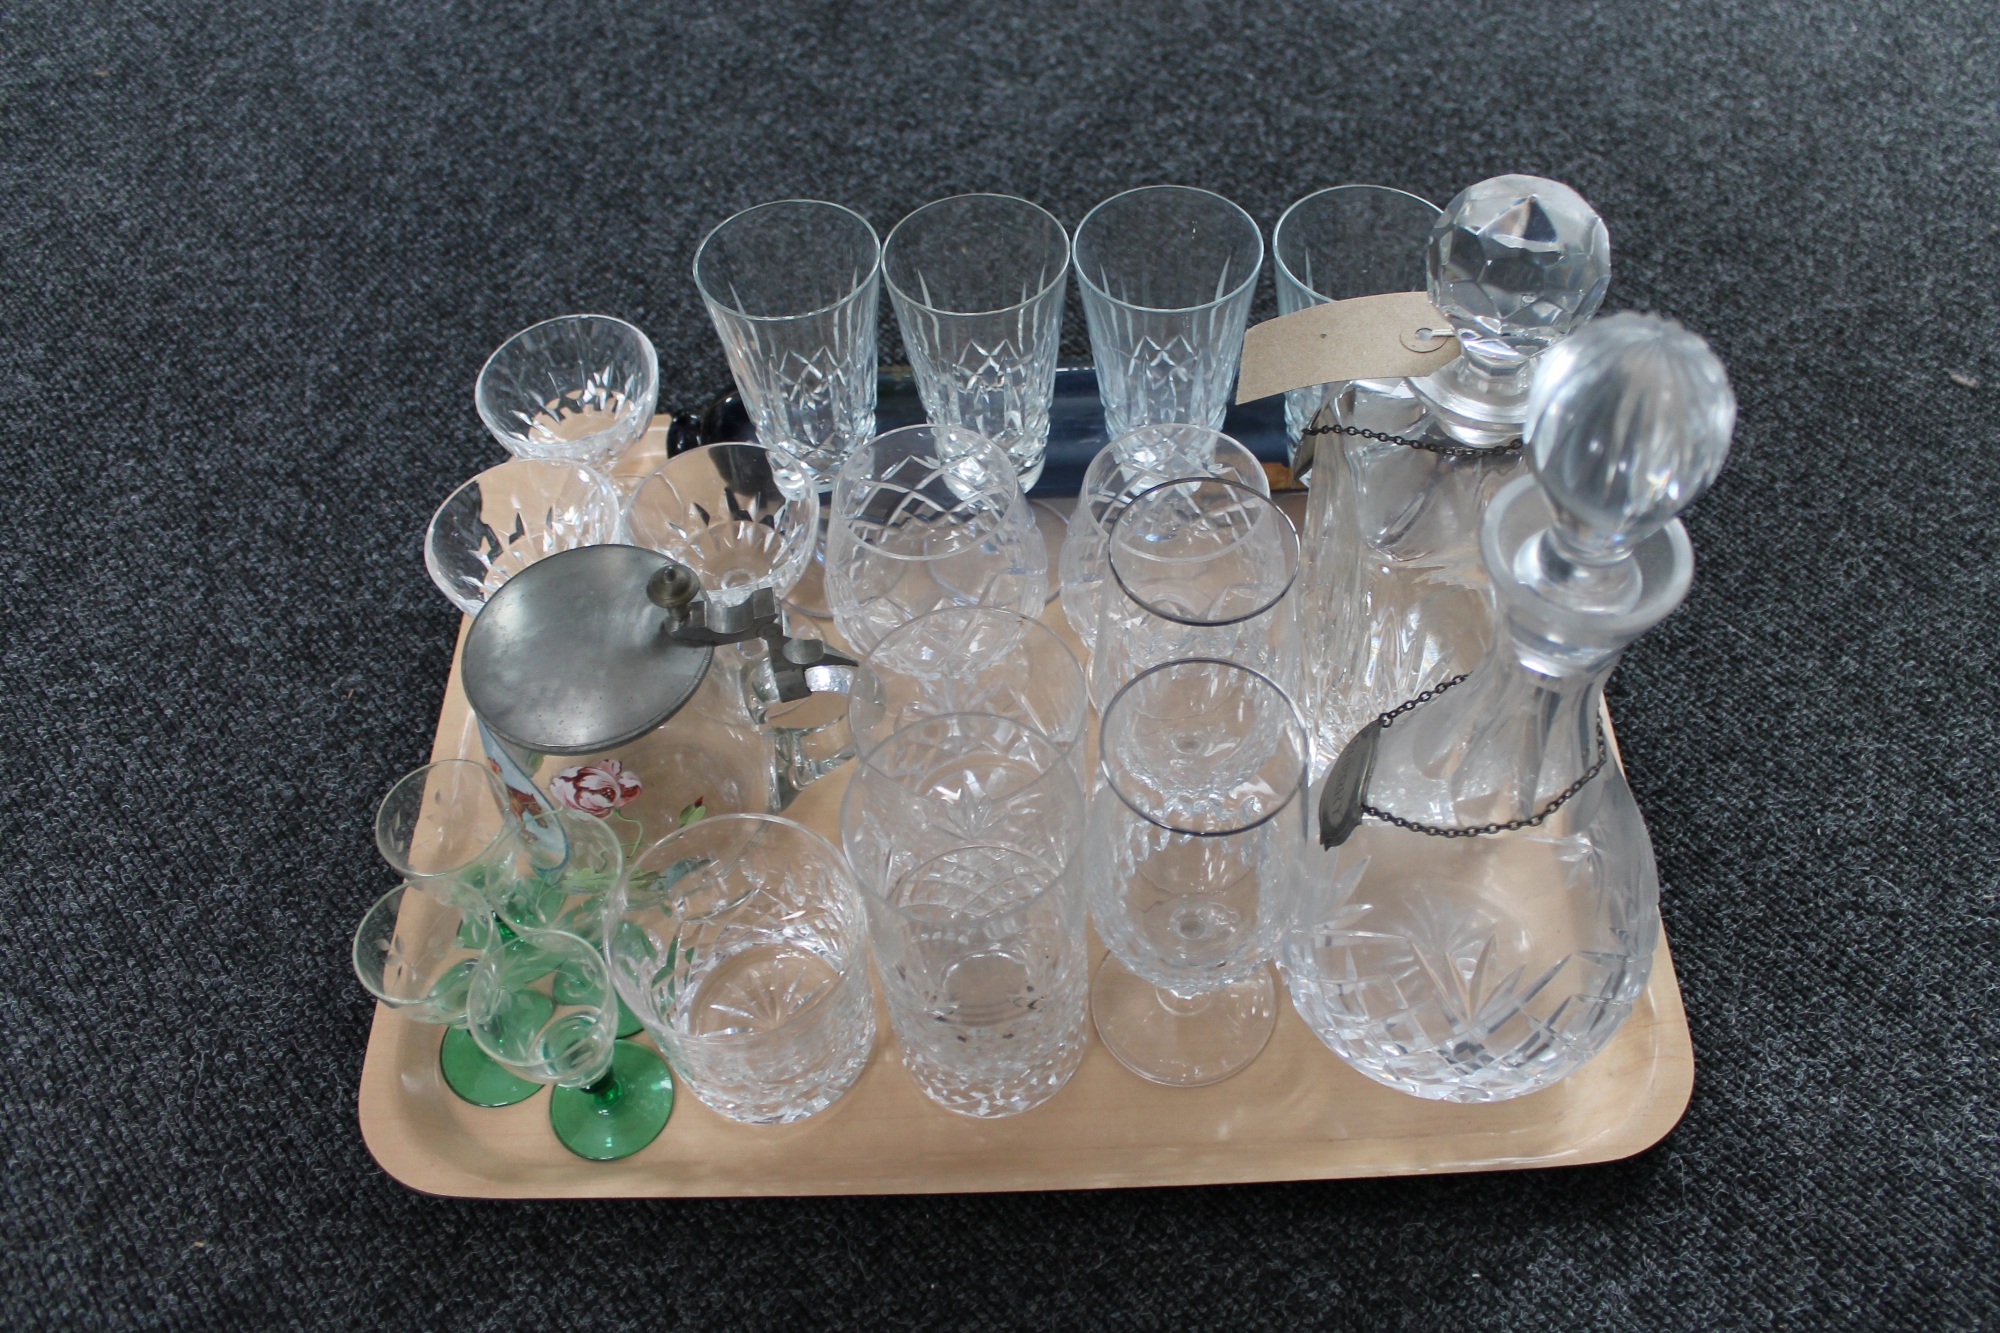 A tray of glass ware - antique blue glass, antique rolling pin, two decanters with labels,